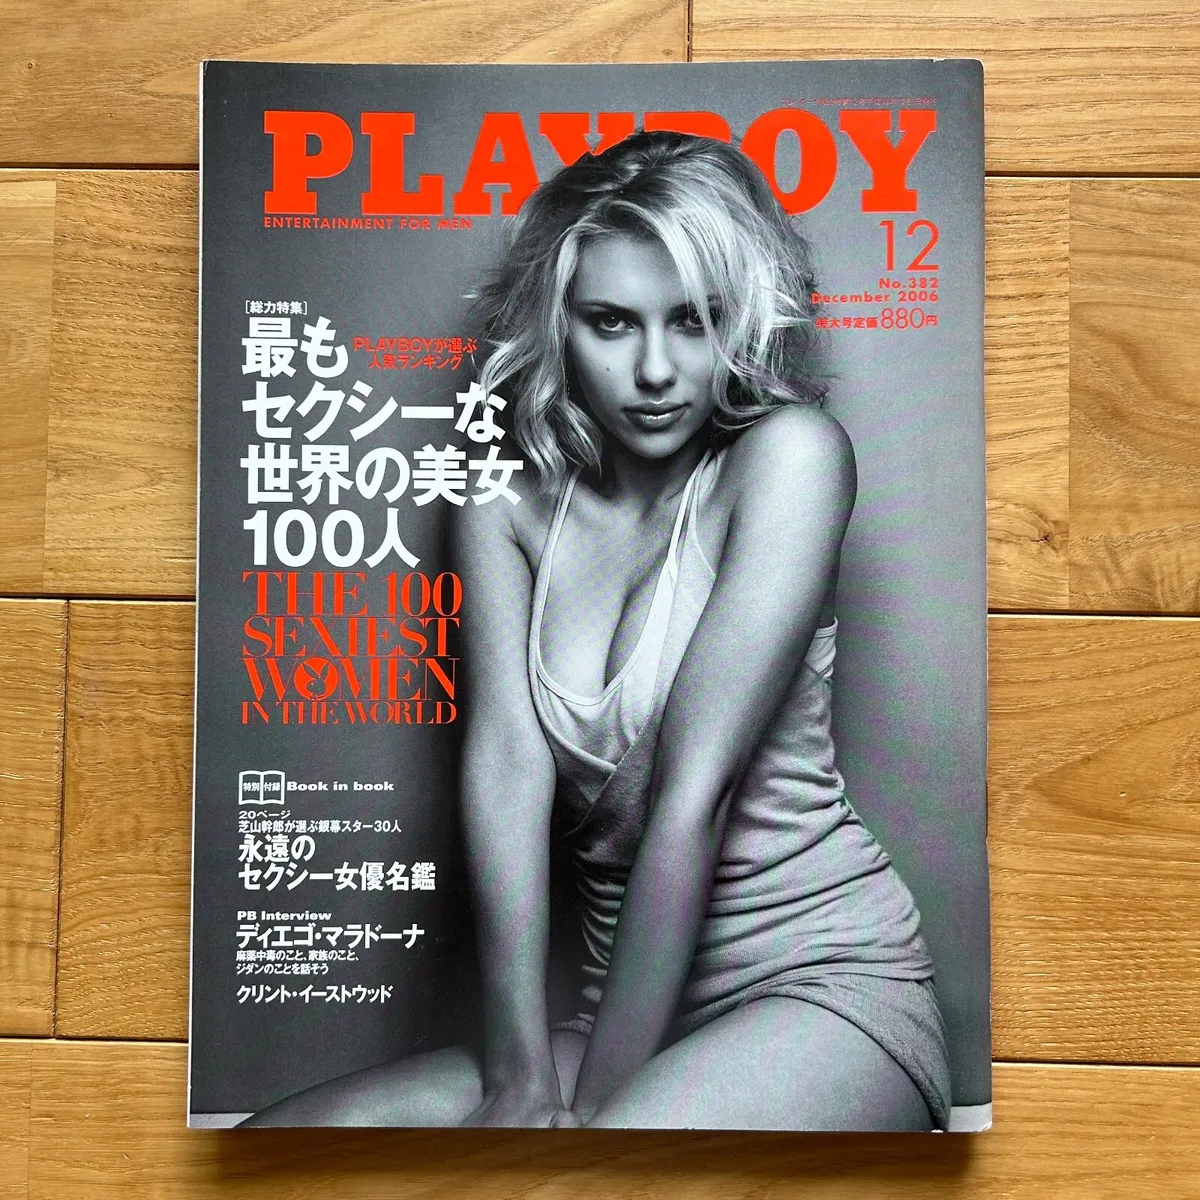 aaron hasley recommends Scarlett Johansson Playboy Pictures